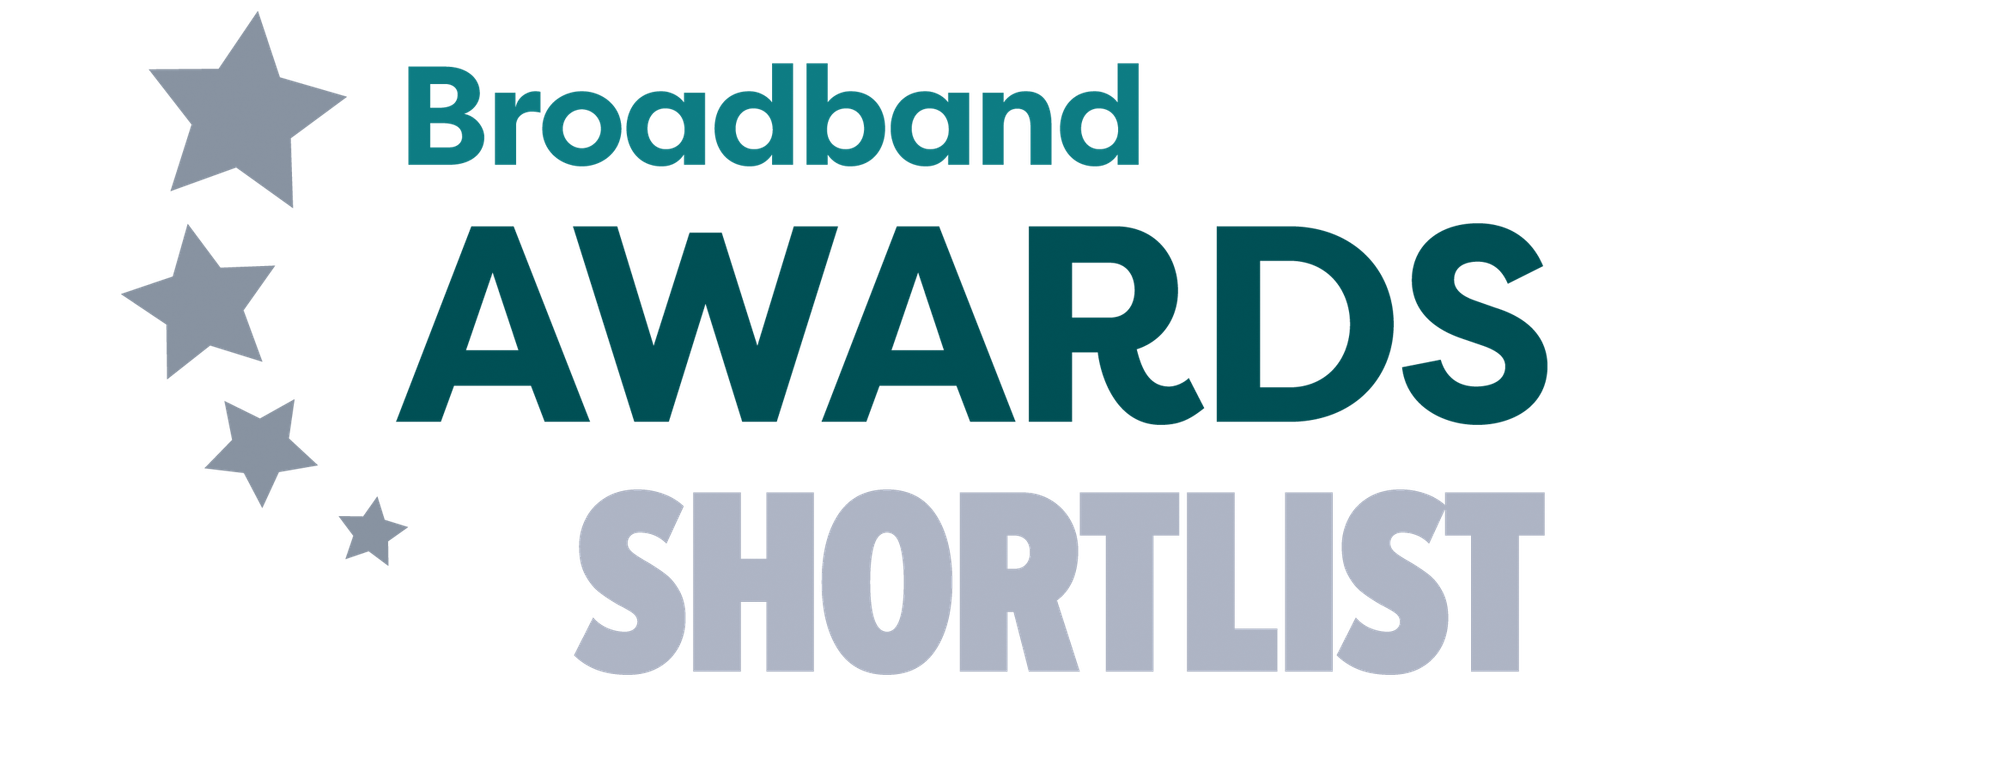 RtBrick selected as a finalist in the 2020 Broadband Awards